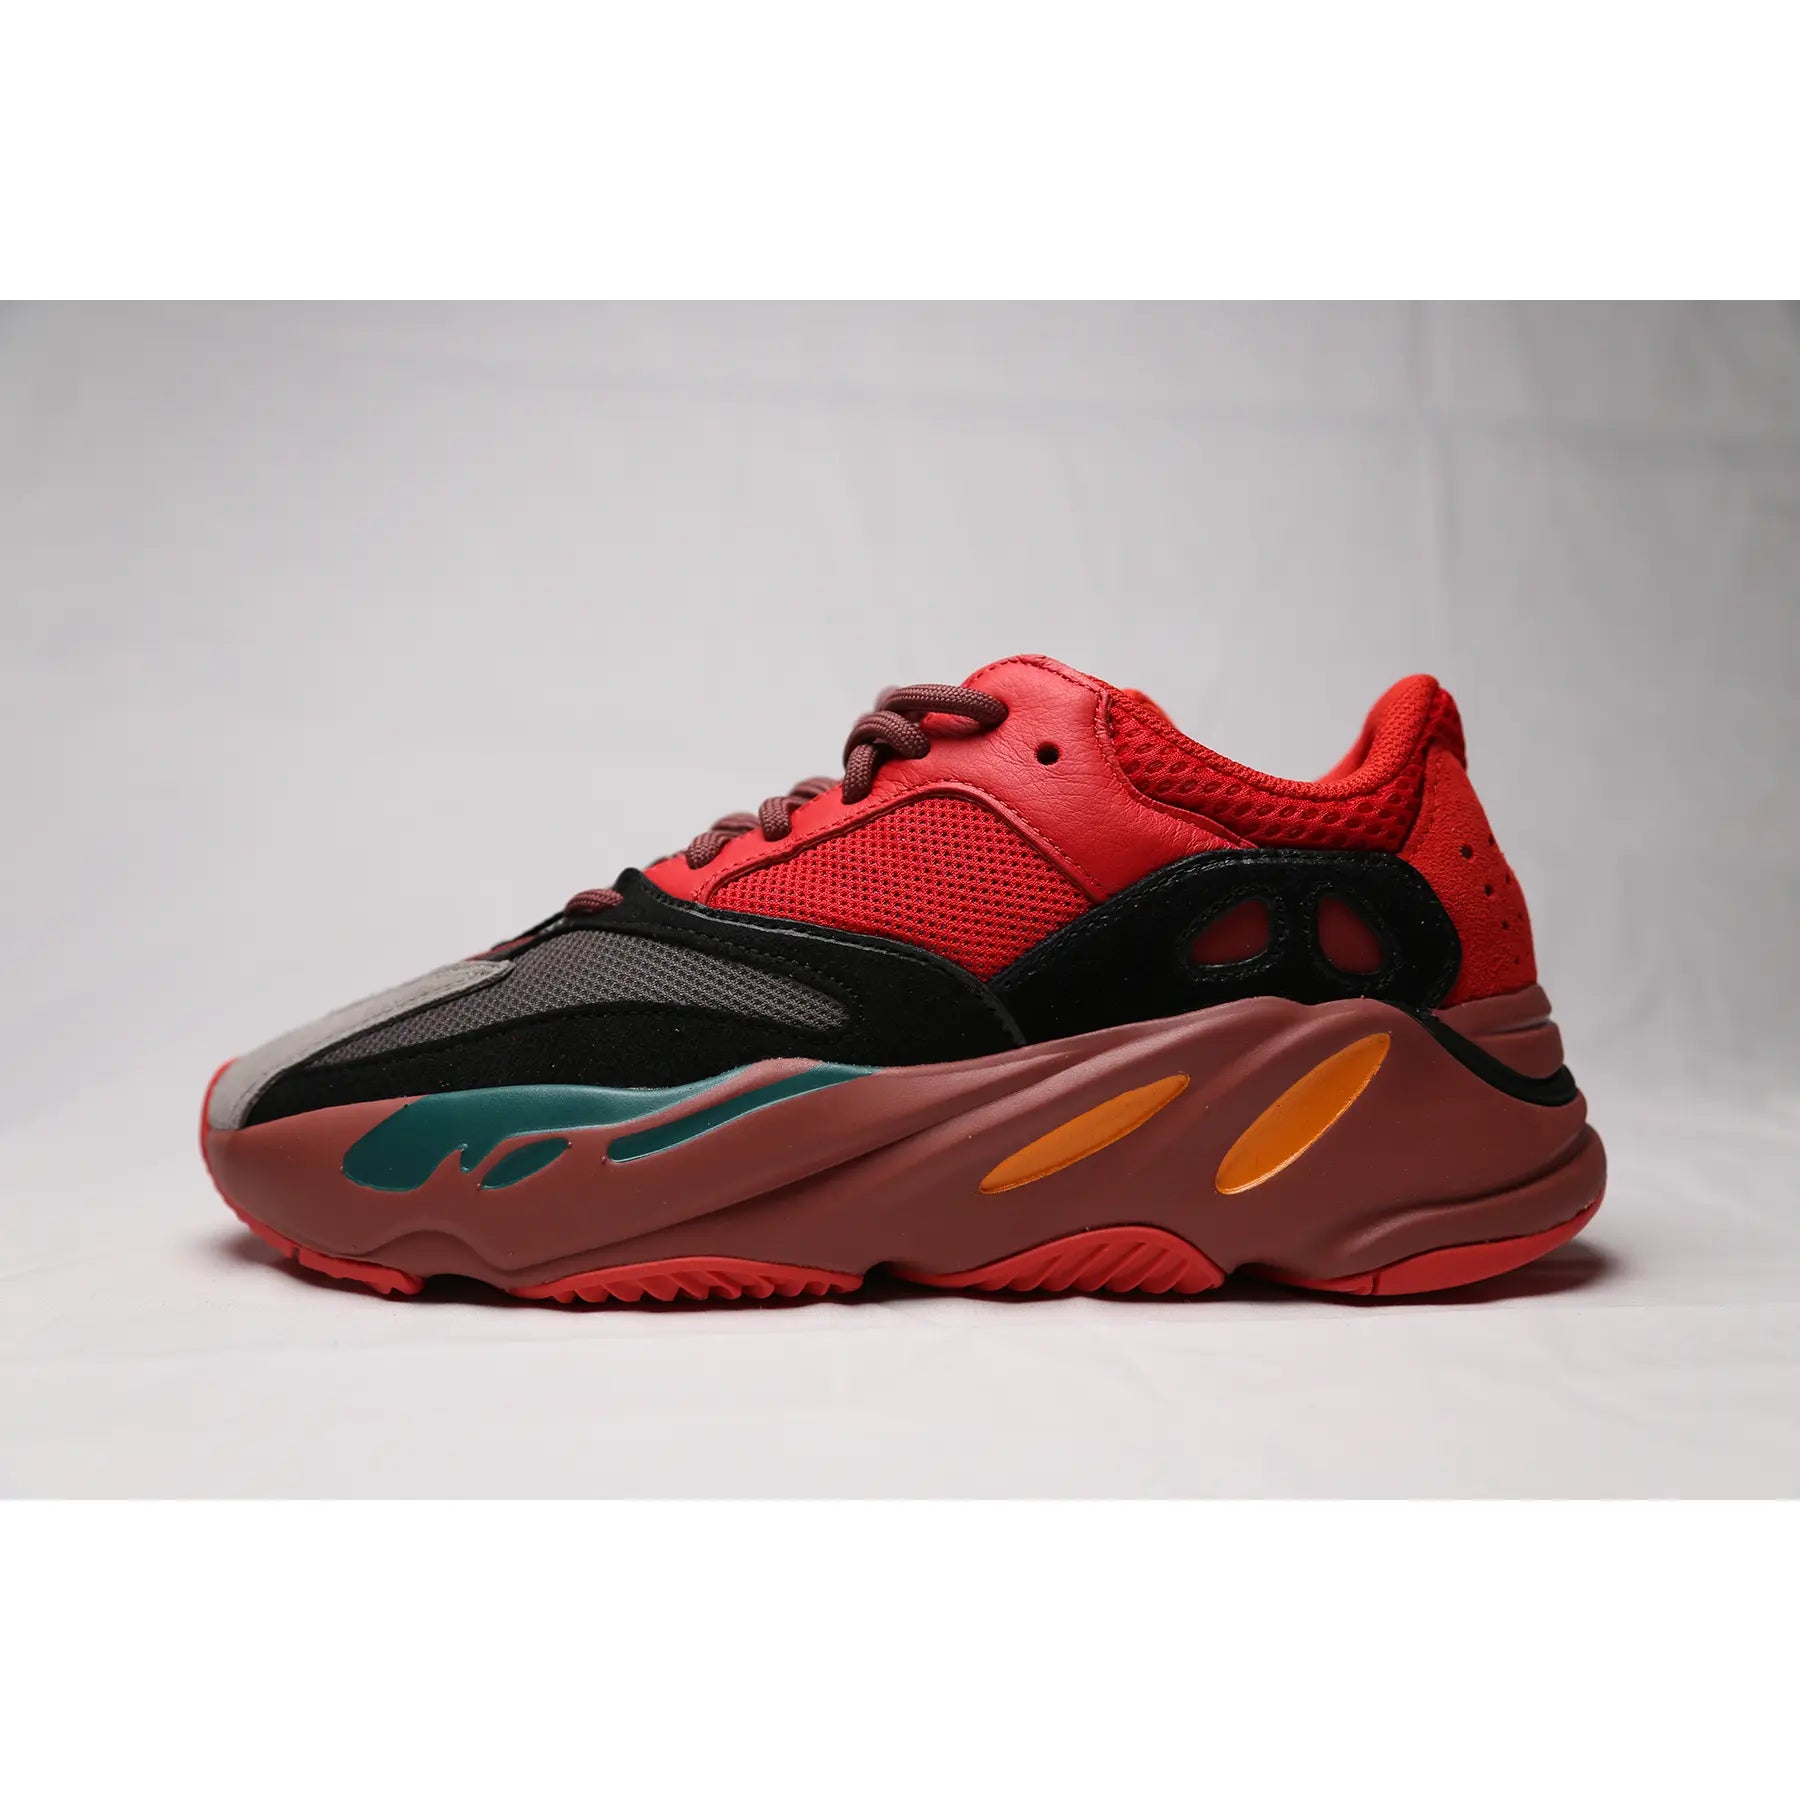 Adidas Yeezy Boost 700 V1 Red